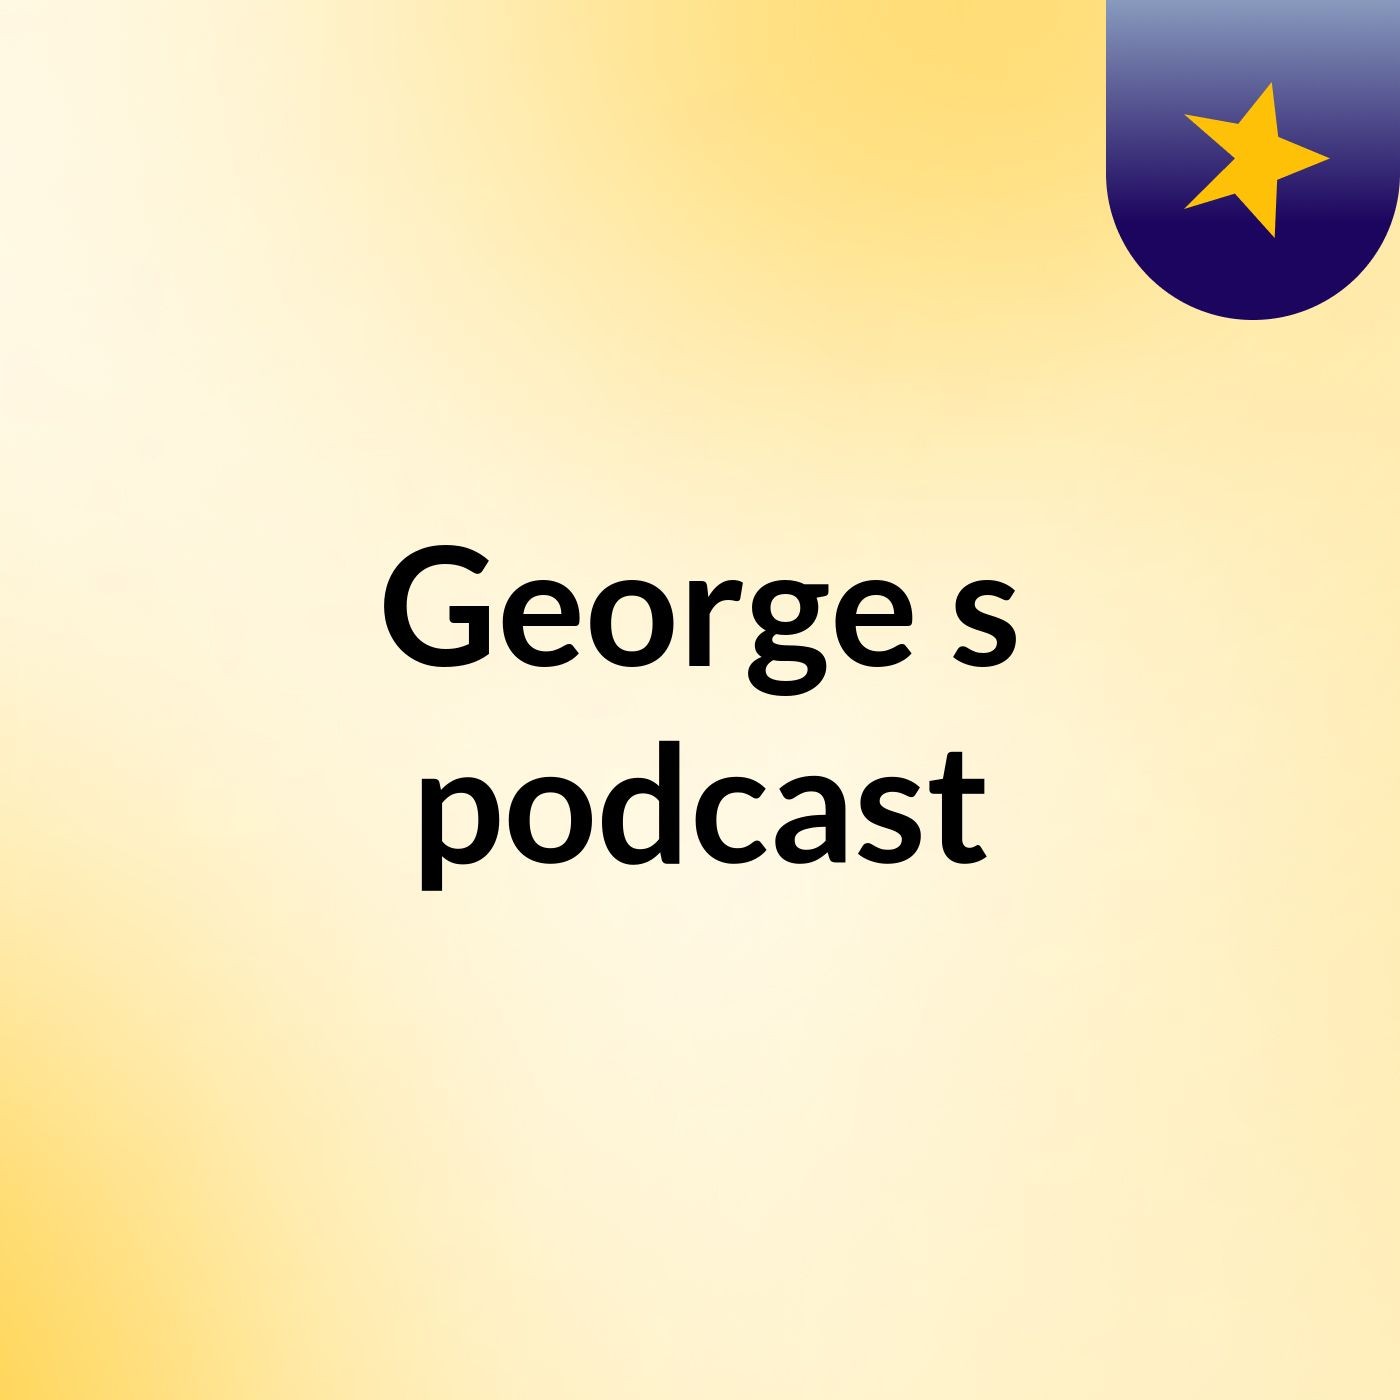 Episode 2 - George's podcast